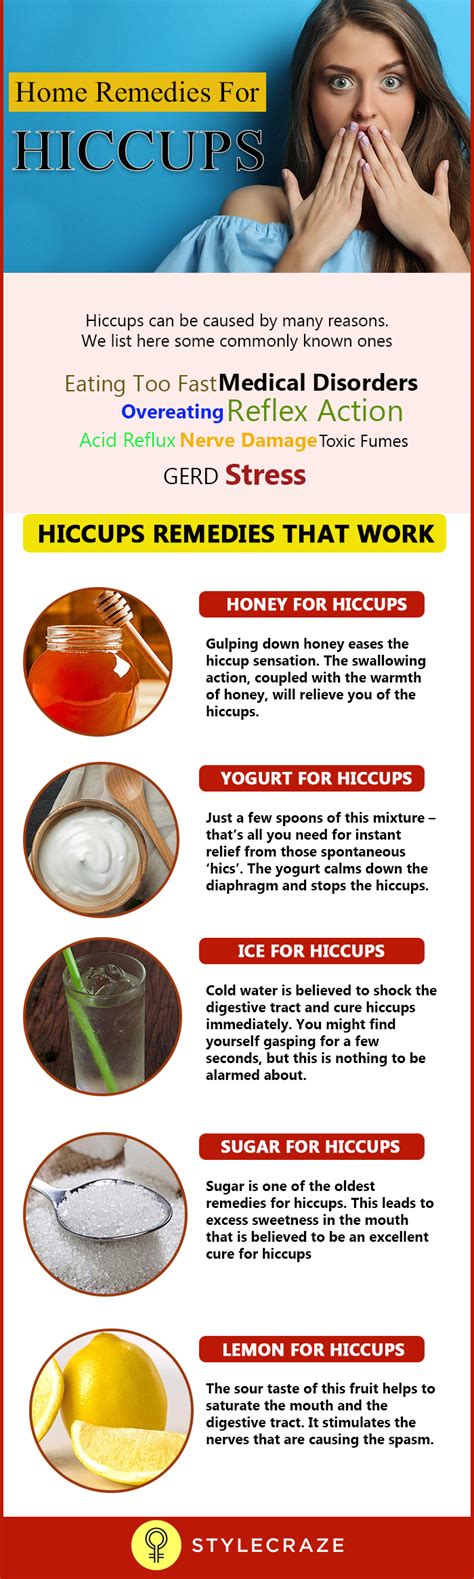 Top 14 Home Remedies To Get Rid Of Hiccups Hiccup Remedies Natural